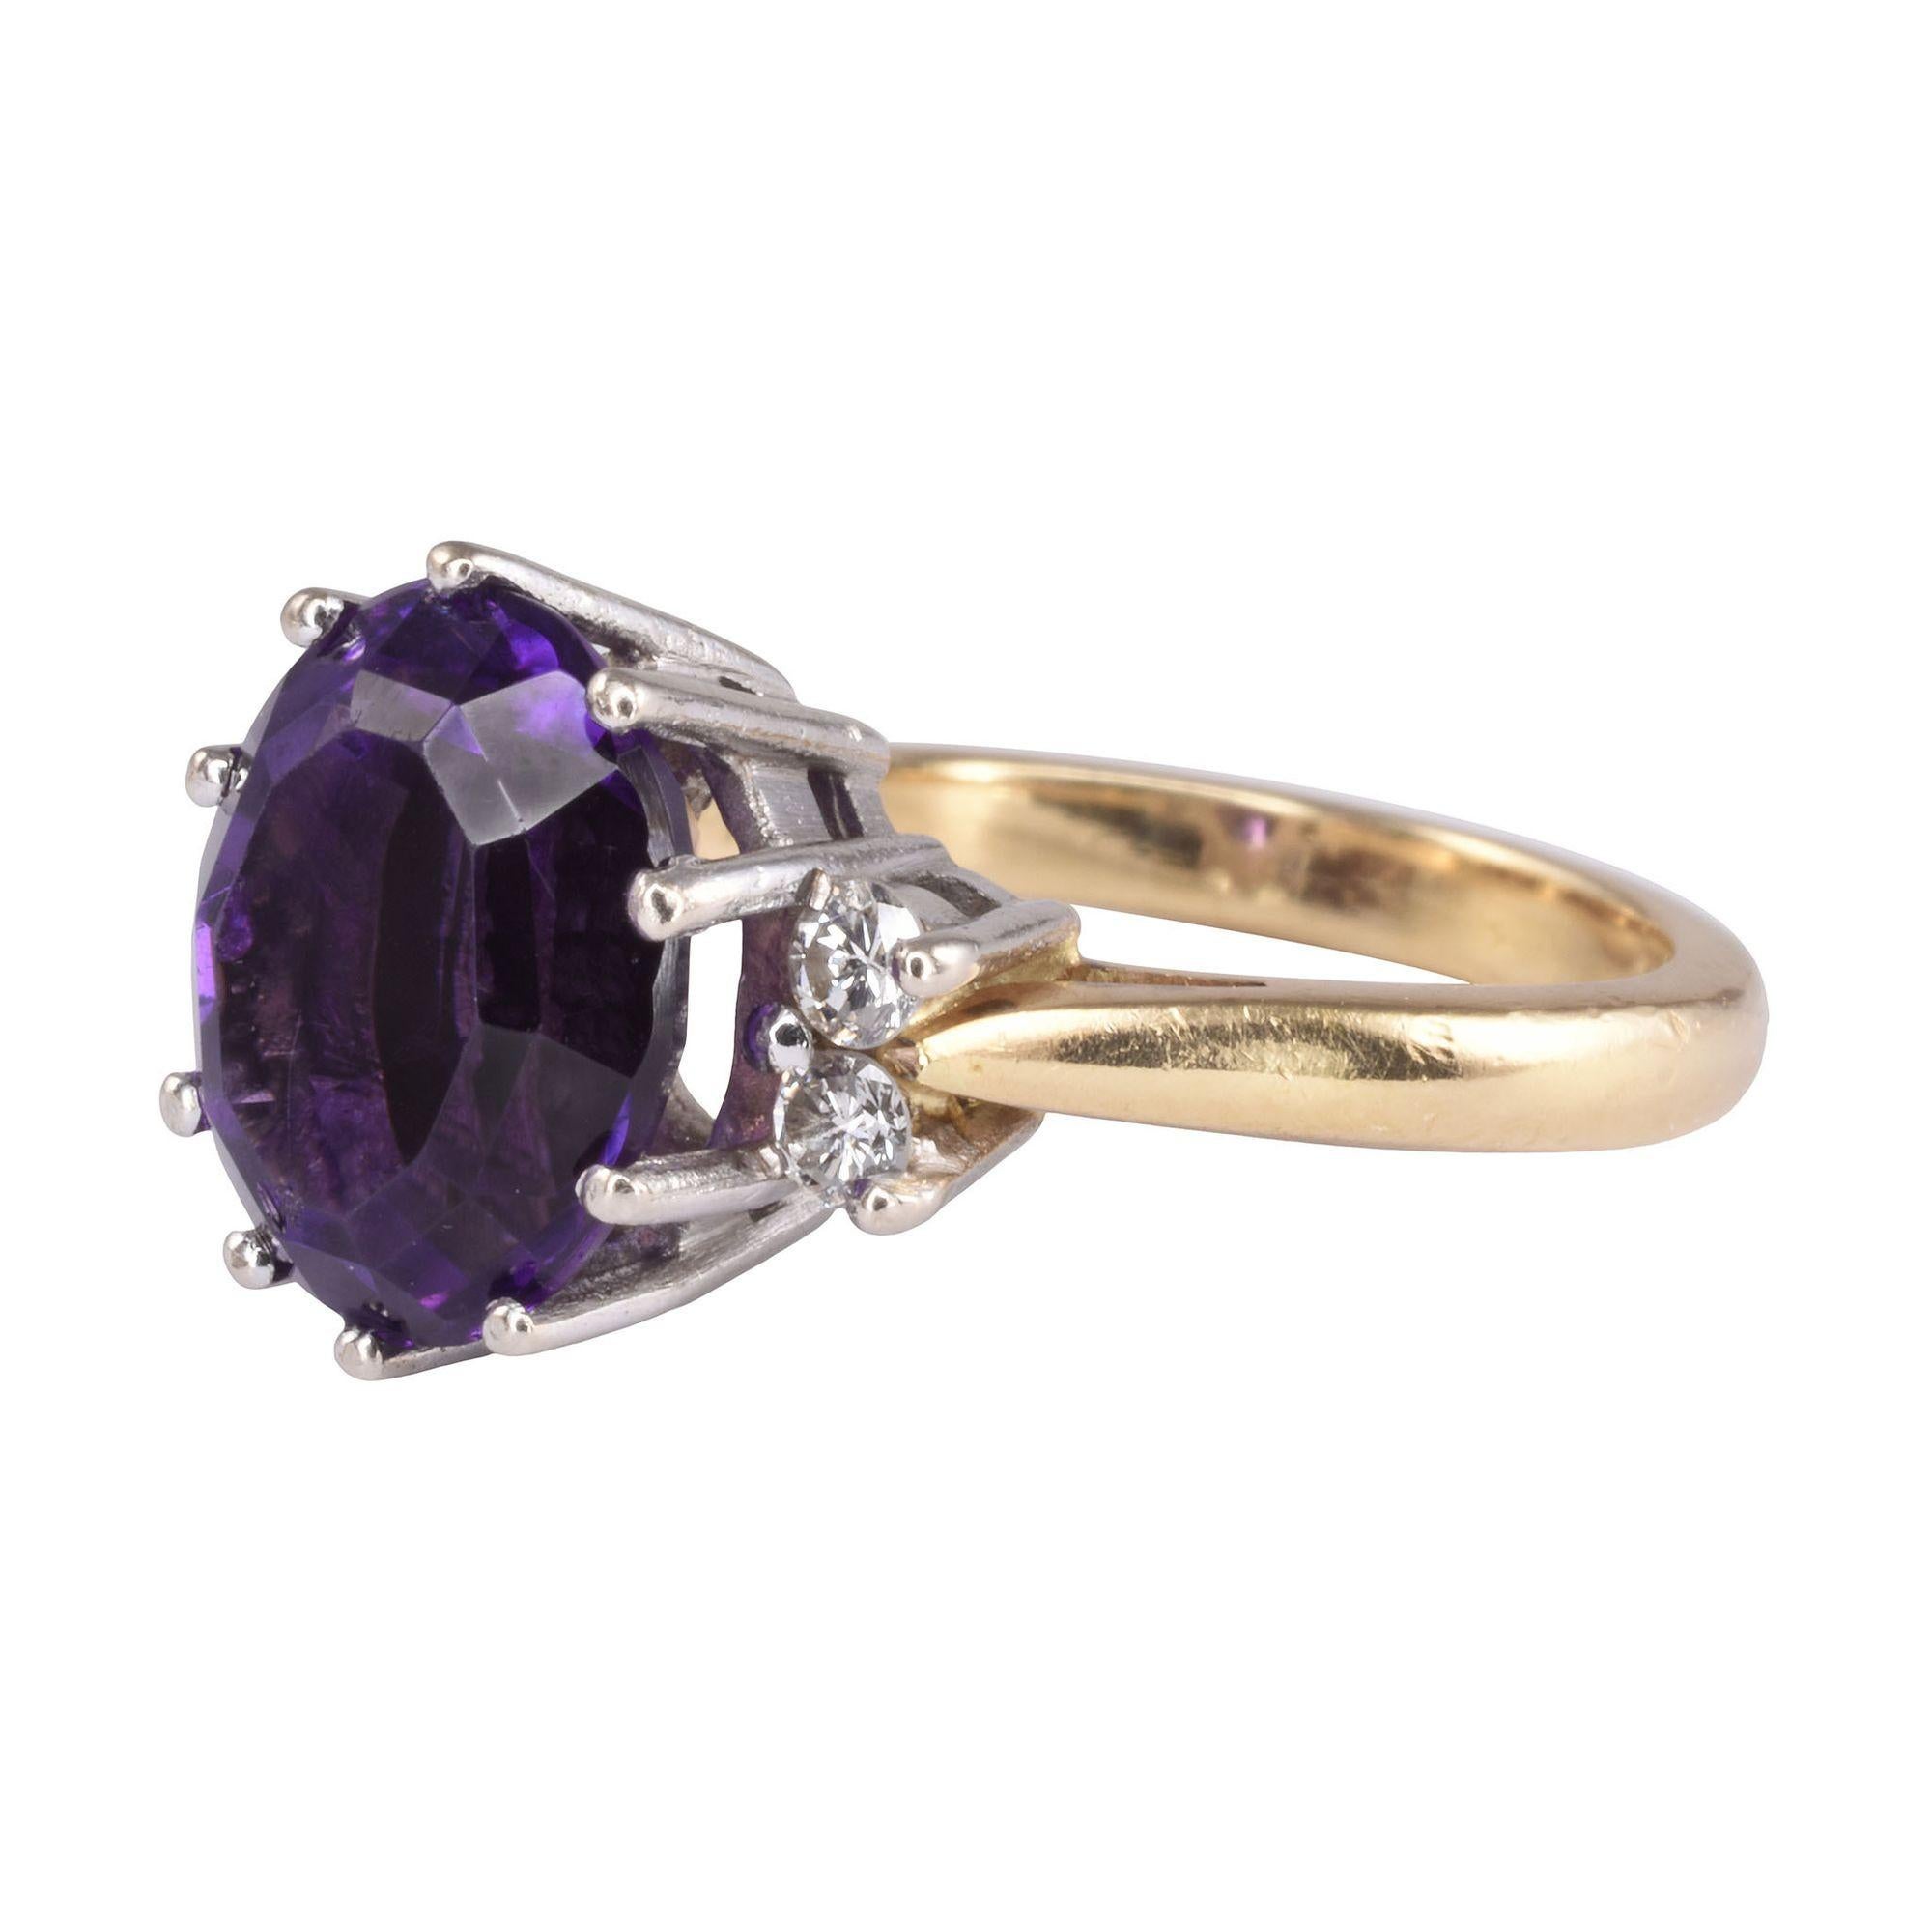 Vintage English 18K mixed cut amethyst ring, dated 1977. This vintage ring is crafted in 18 karat gold and features a 3.0 carat oval mixed cut amethyst with a deep, amazing color. The accent diamonds have VS clarity and I-J color. This vintage